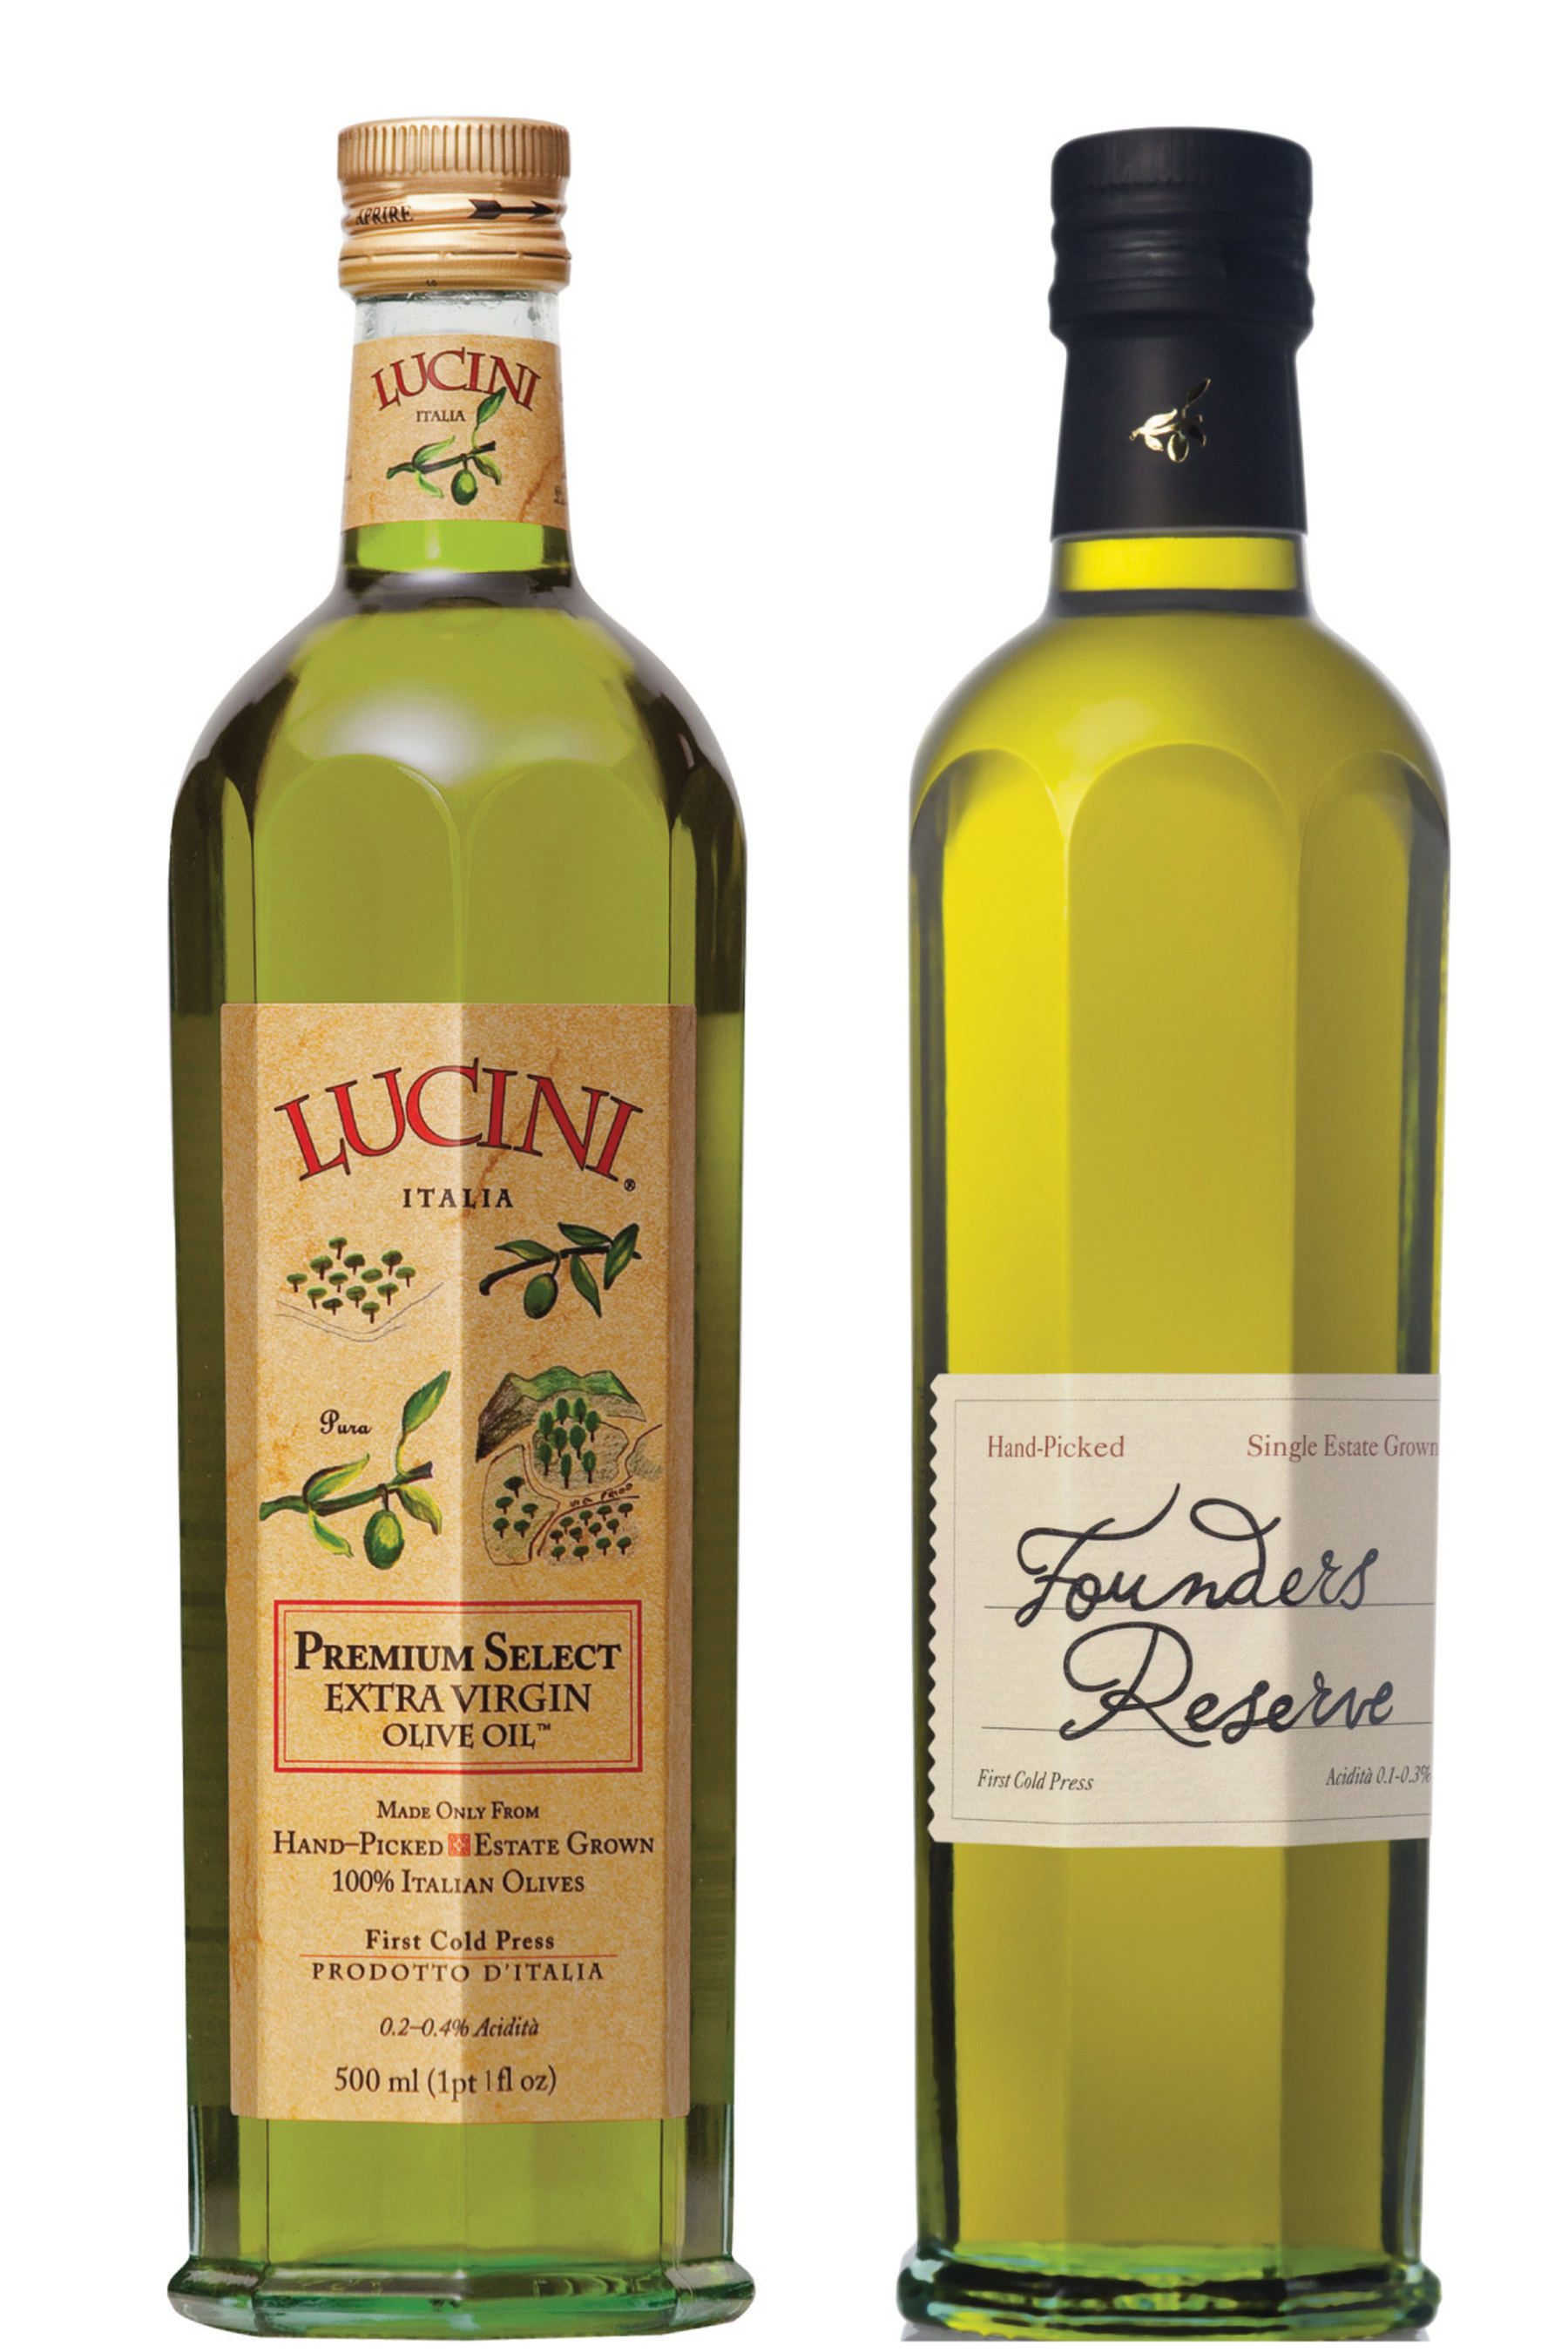 Lucini Premium Select Extra Virgin Olive Oil and Founders Reserve Premium Select Extra Virgin Olive Oil were honored with Gold Medals at the prestigious 2014 New York International Olive Oil Competition. (PRNewsFoto/Lucini Italia)